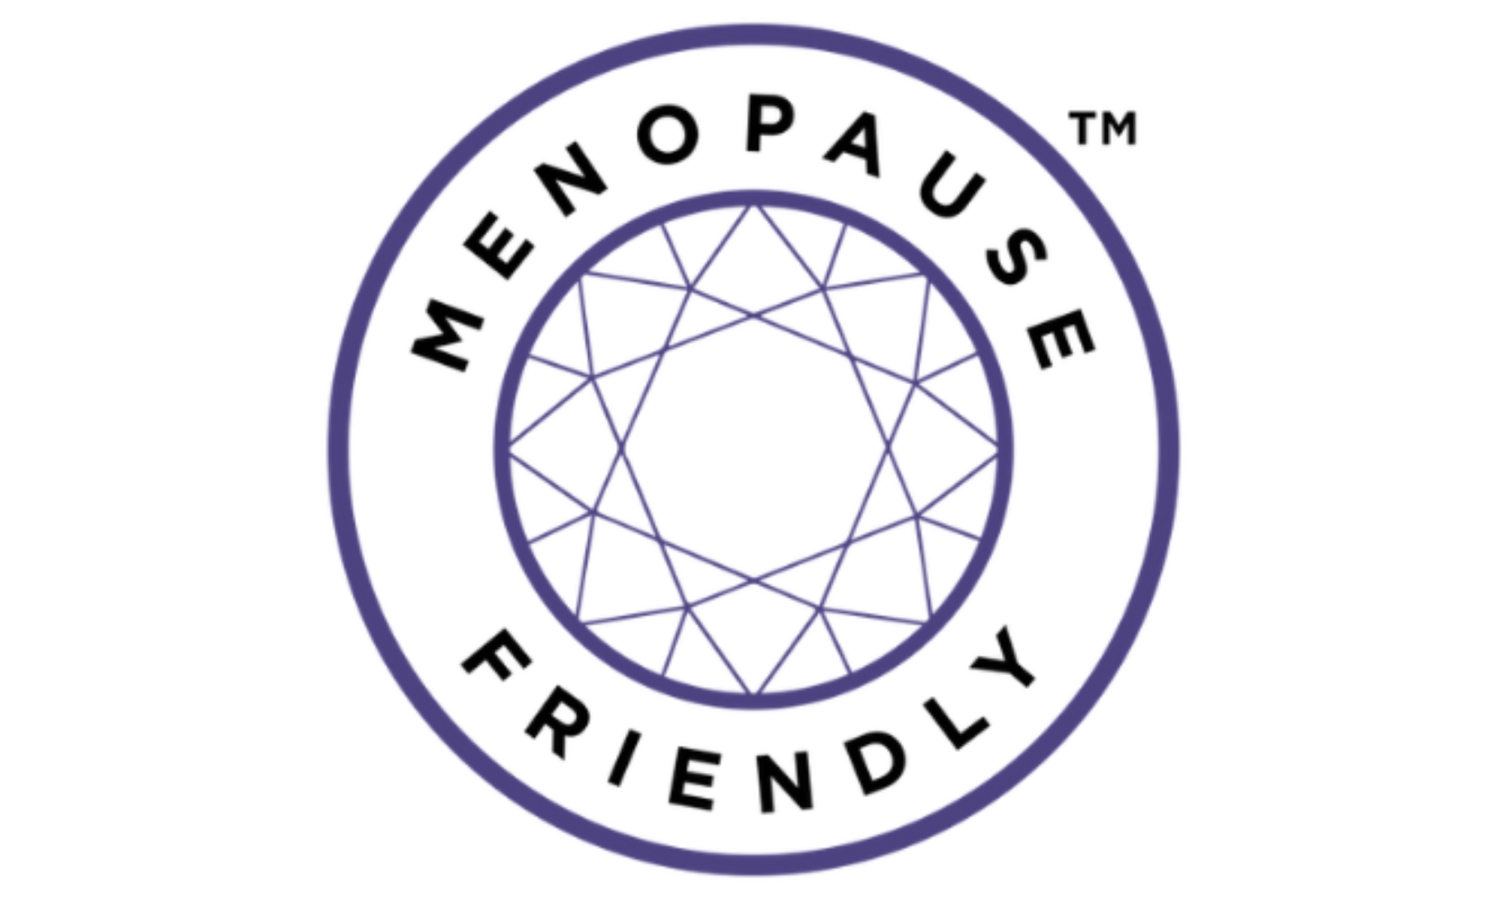 Menopause Friendly logo, includes that text in a circle